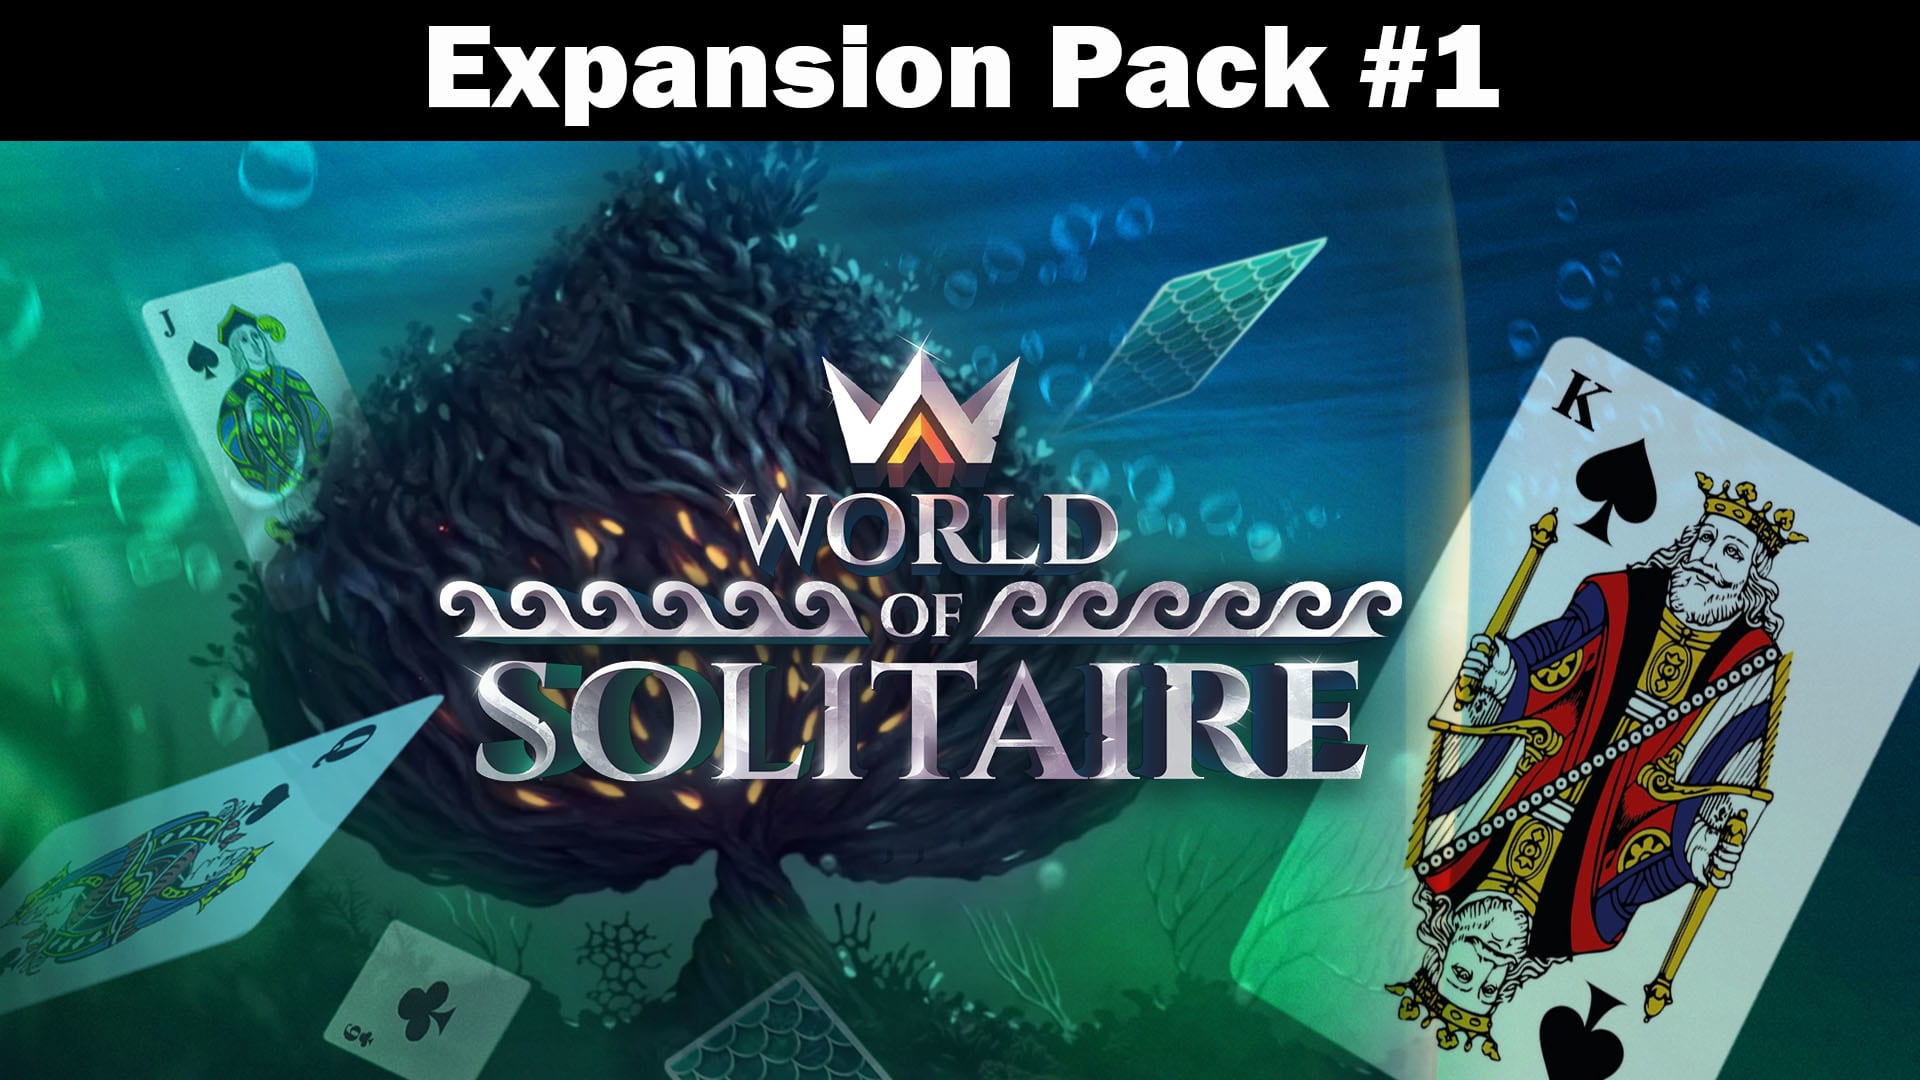 World of Solitaire: Expansion Pack #1